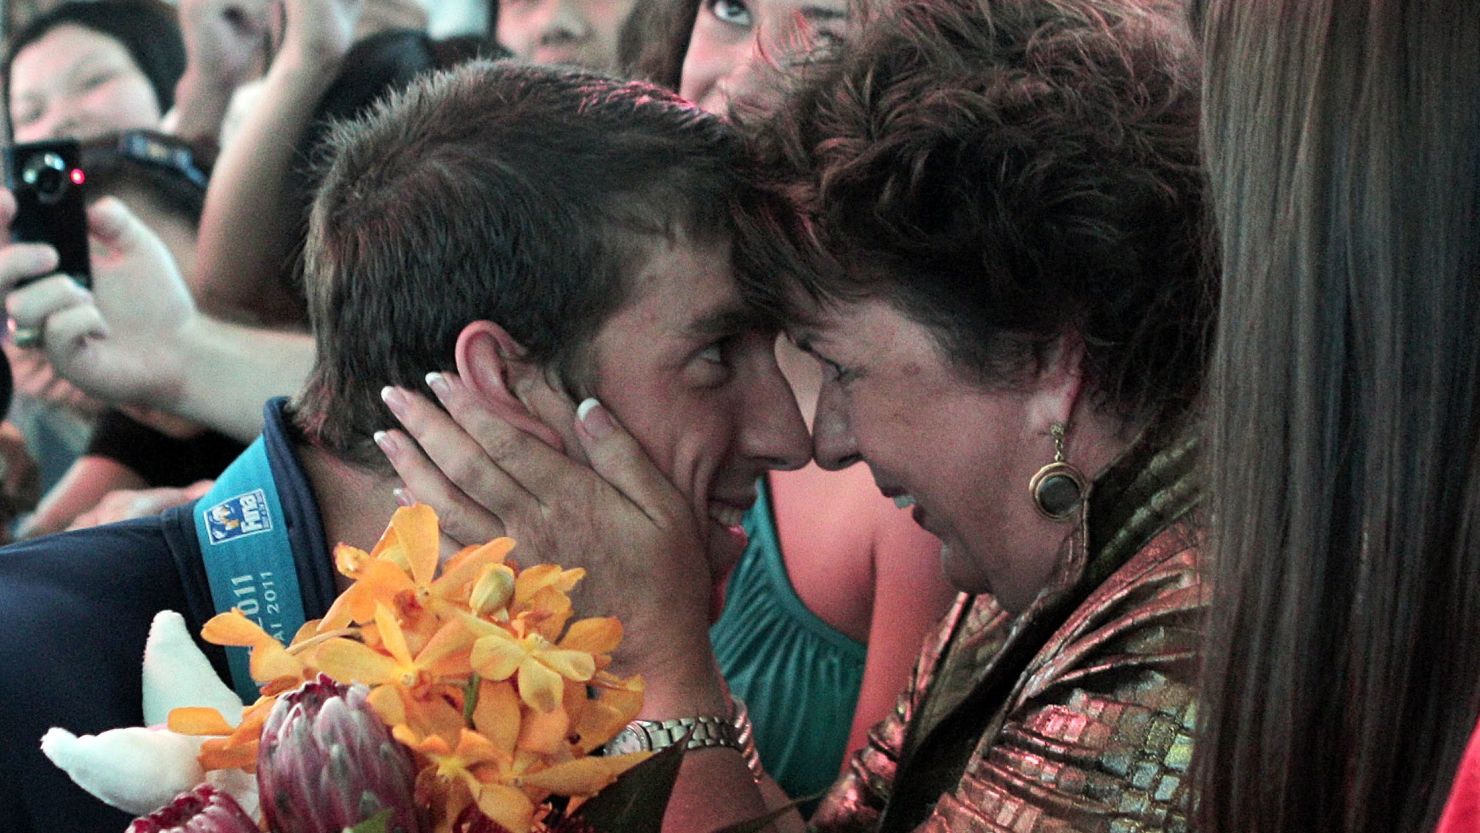 Olympic swimmer Michael Phelps is congratulated by his mother, Debbie, after a competition in Shanghai, China, last July